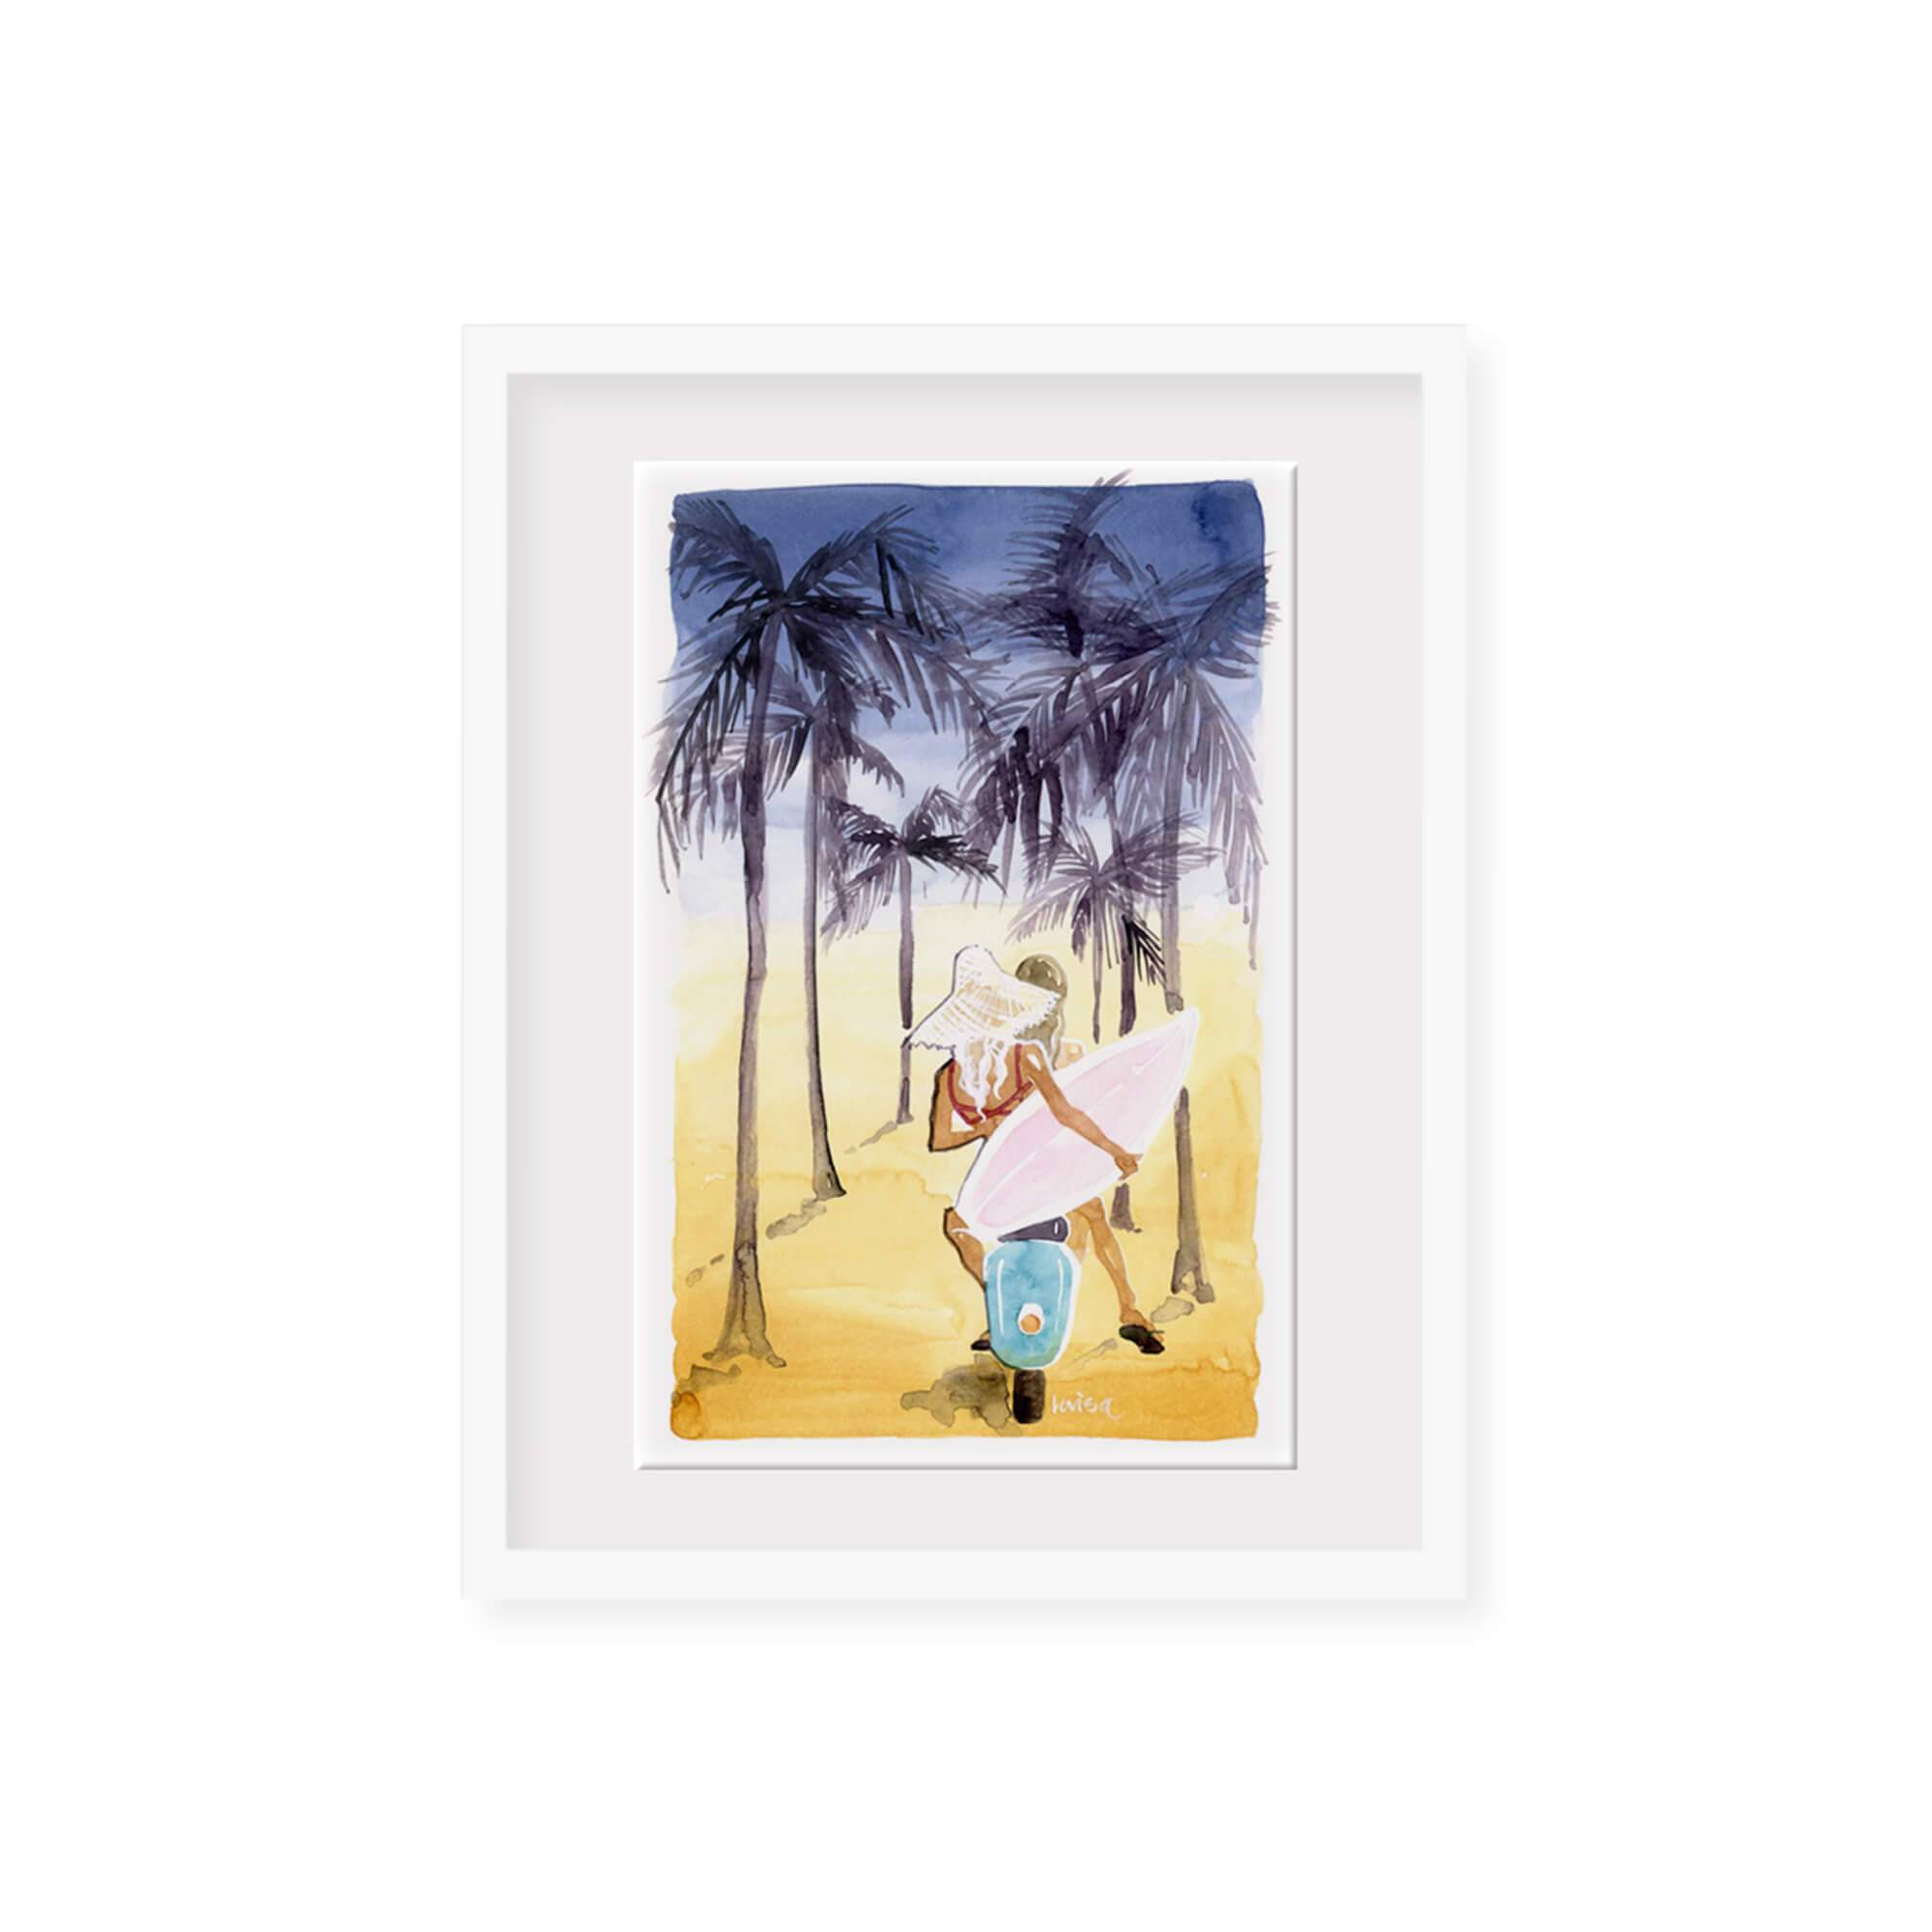 Framed original watercolor artwork of two women surfers riding a scooter to the beach by Hawaii artist Lovisa Oliv